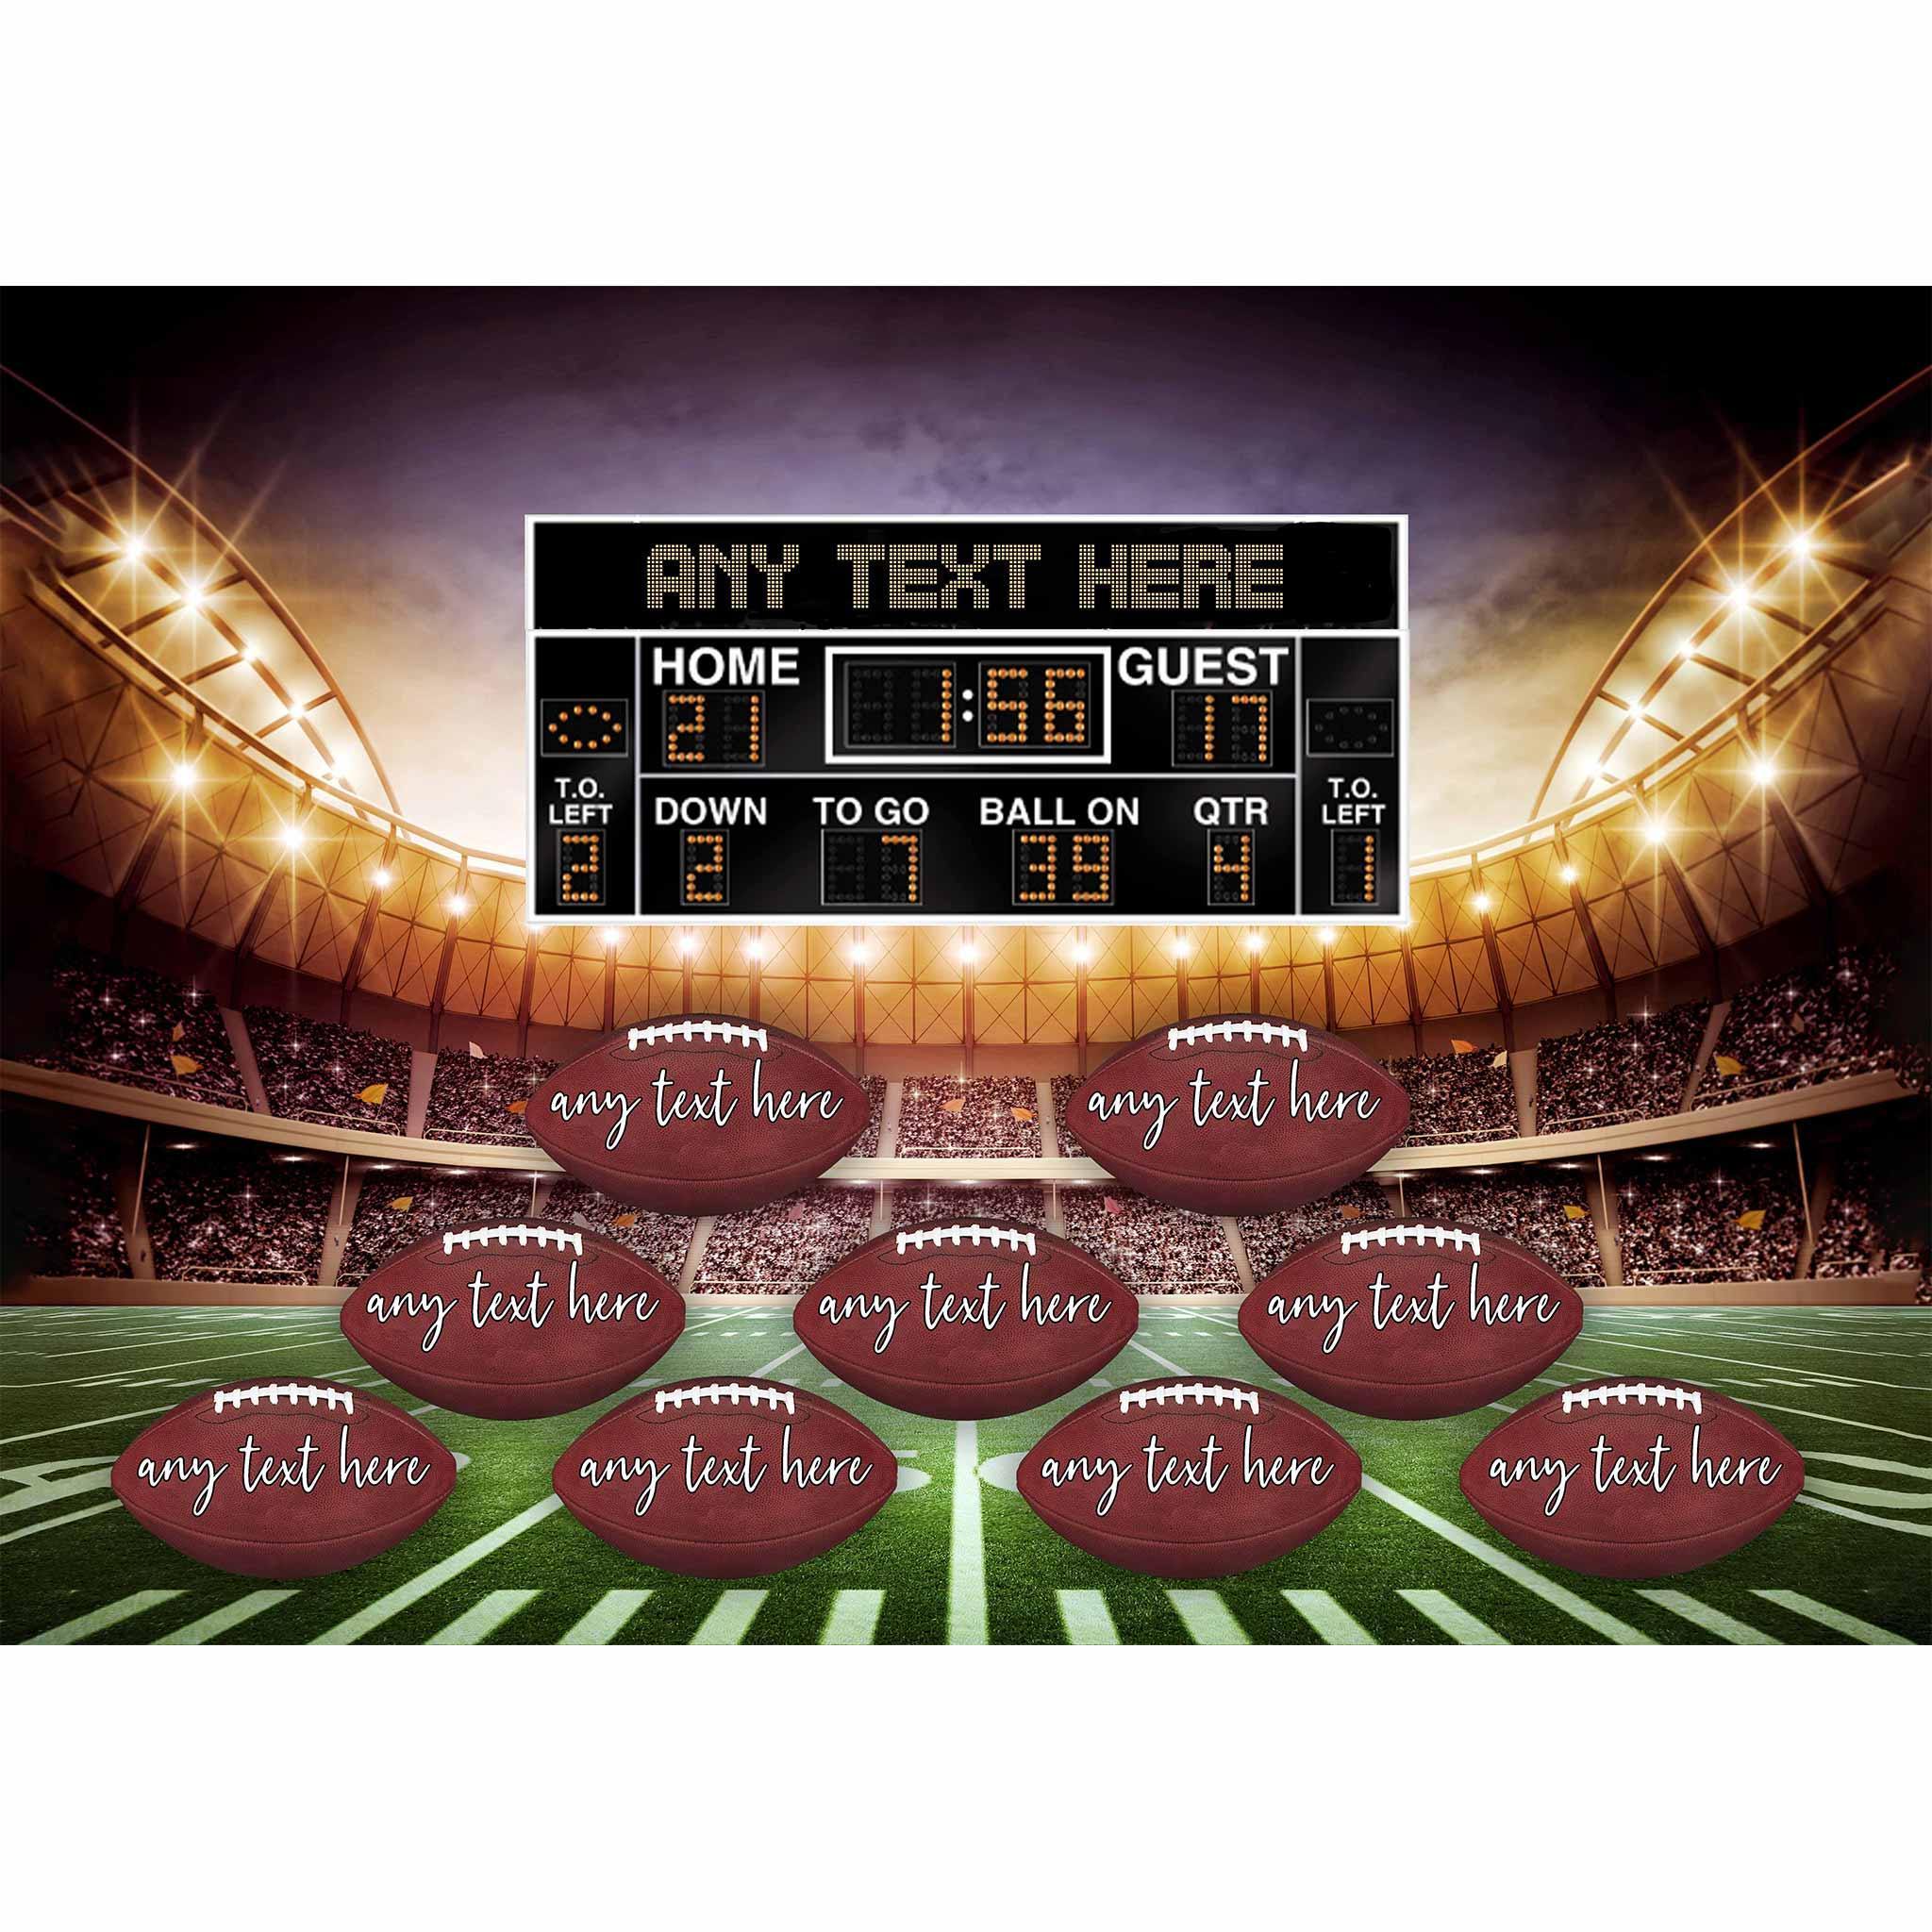 Football Stadium V1 Multiple Names Personalized Footballs And Scoreboard Sign Poster PrintCustomly Gifts